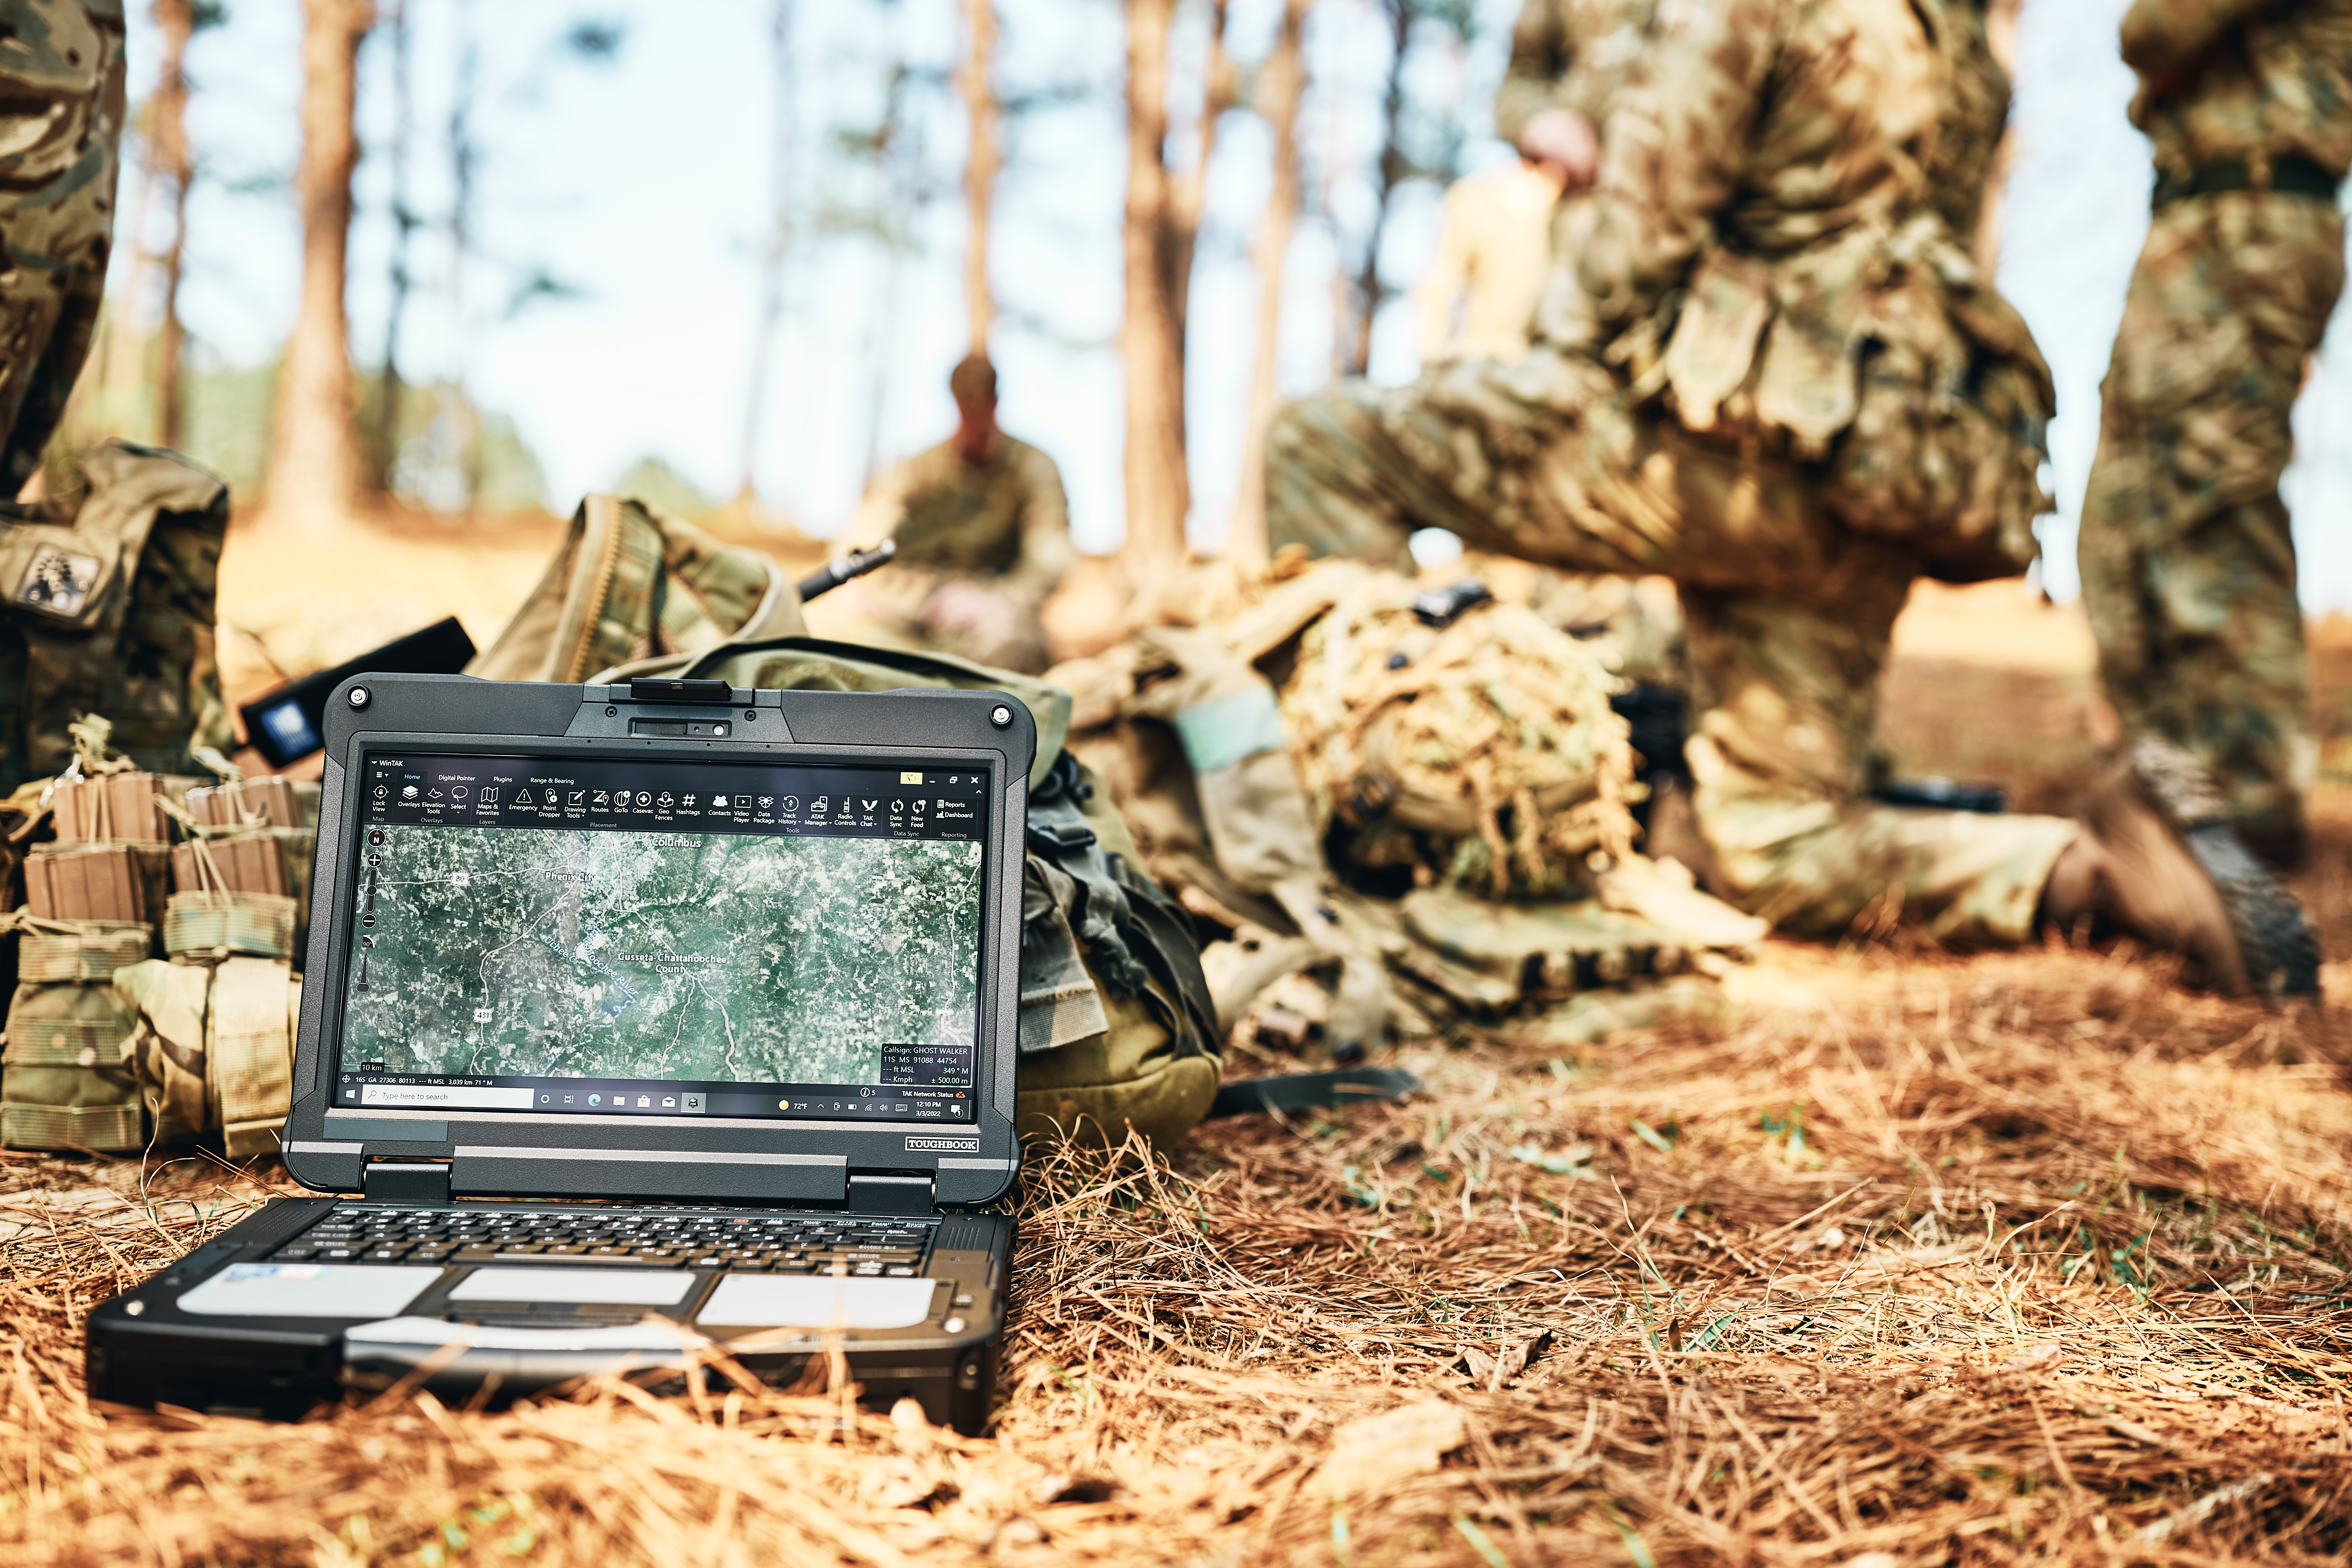 Soldiers in the field using military technology.